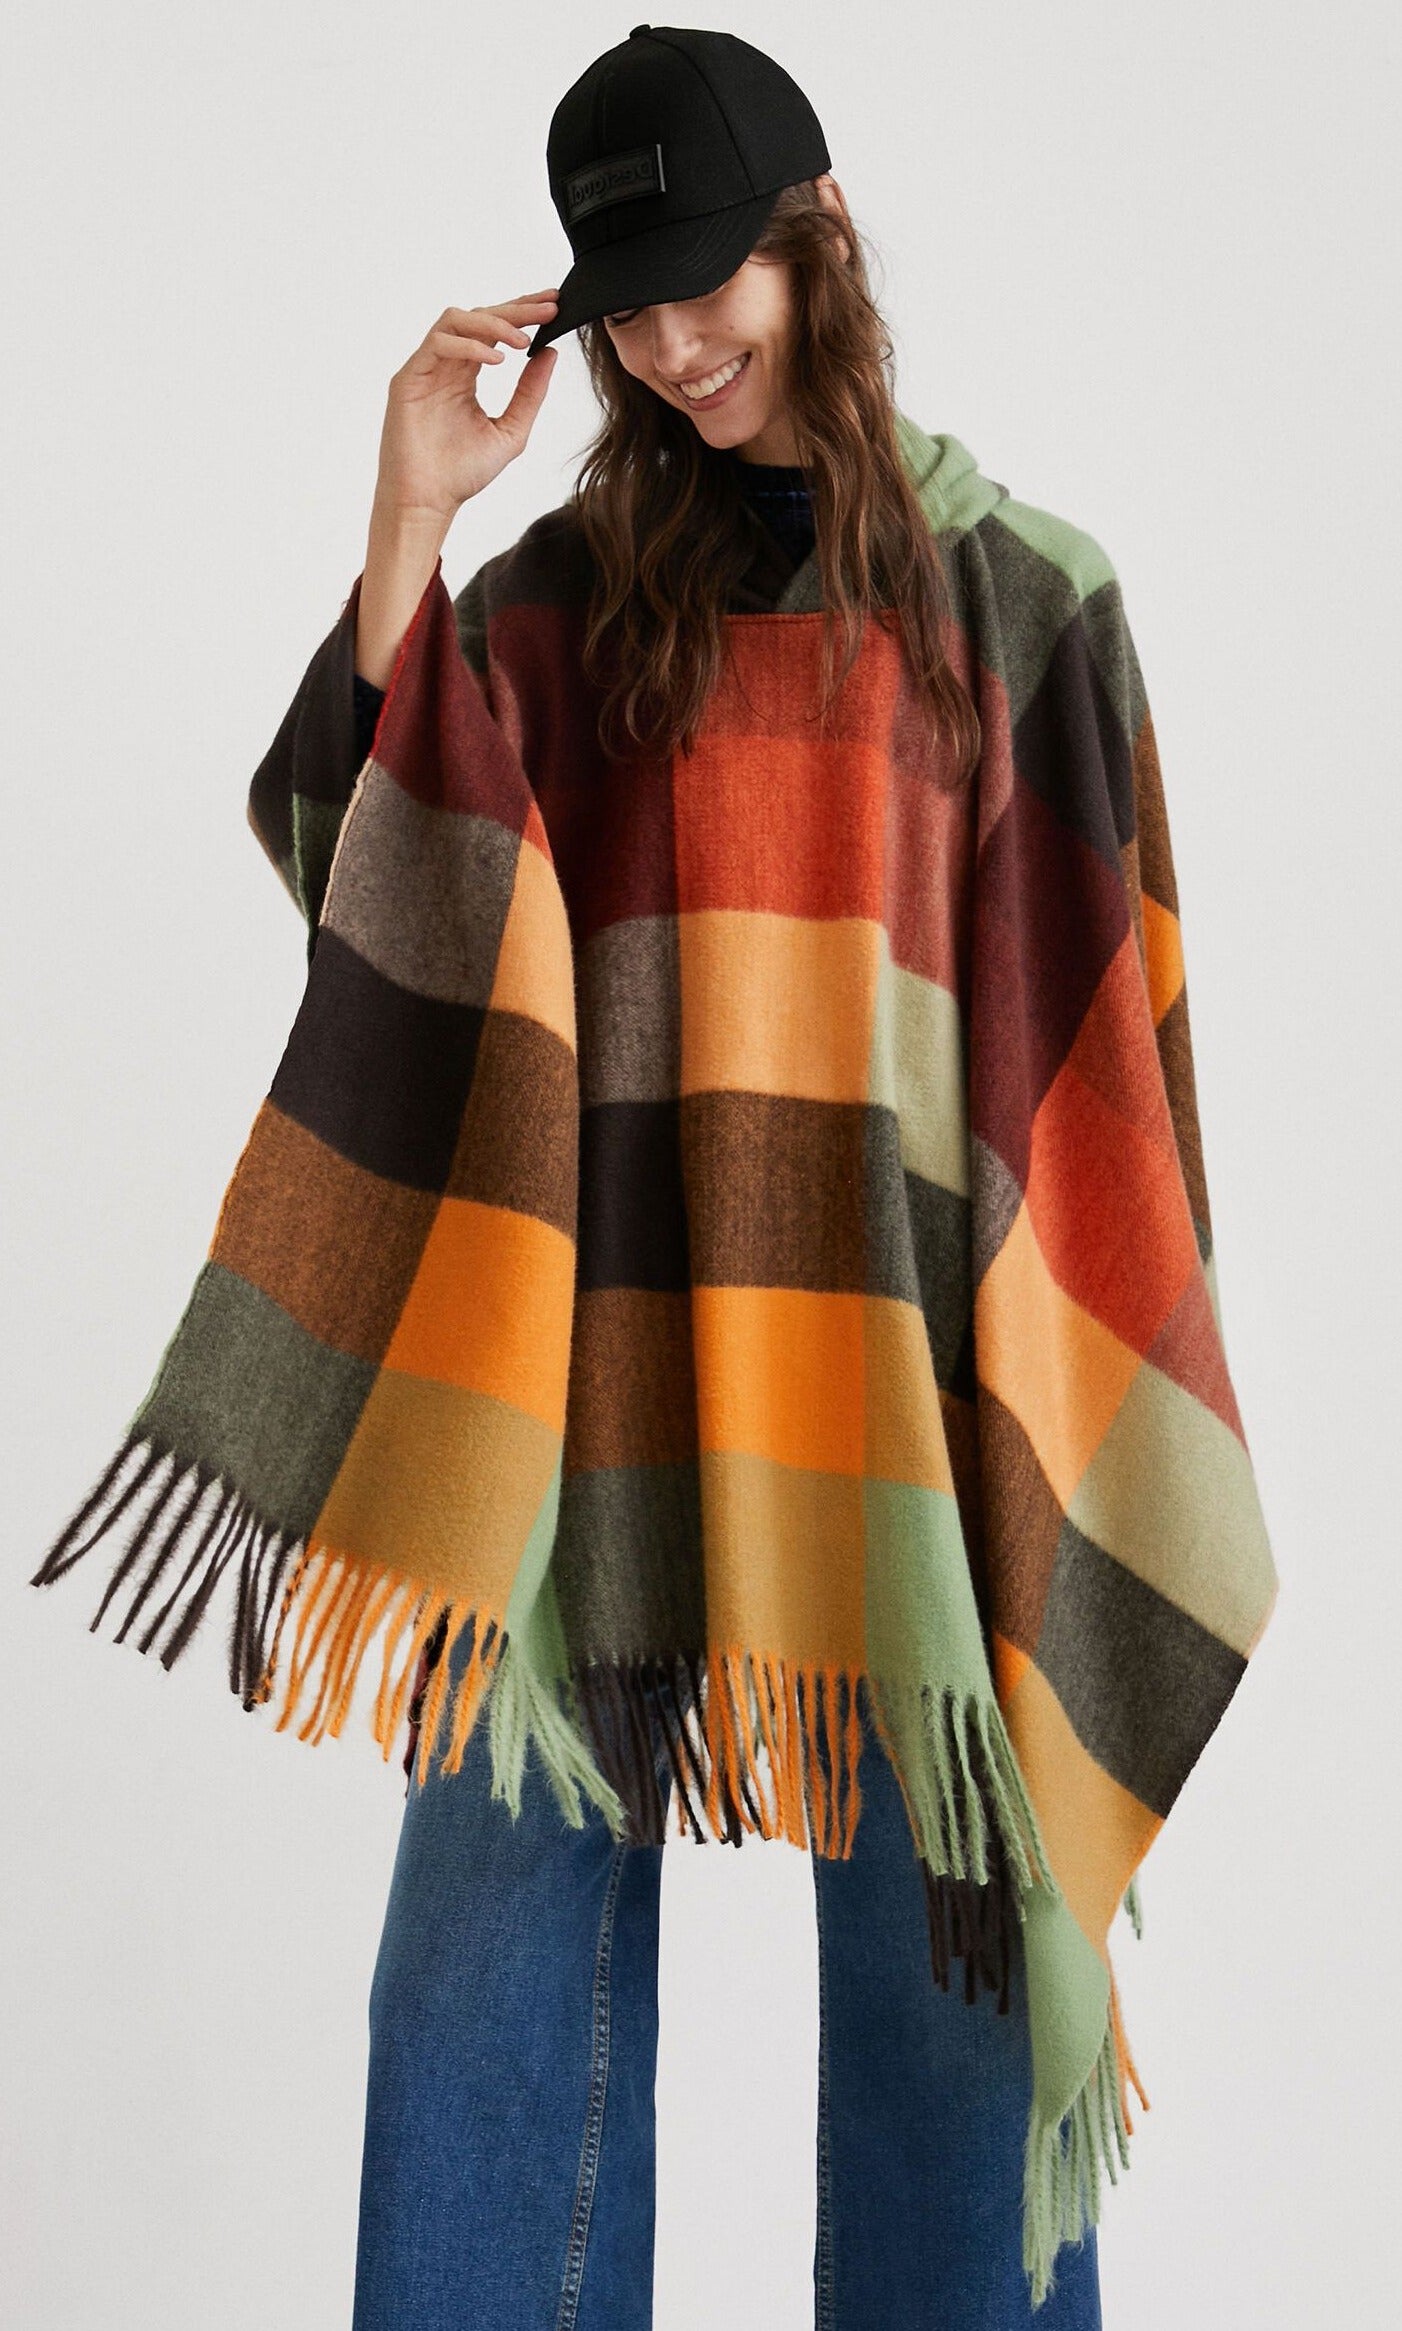 Front top half view of a woman wearing the desigual plaid poncho with wide jeans. This poncho is brown, red, orange, and green plaid. It has a hood and a fringed hem.